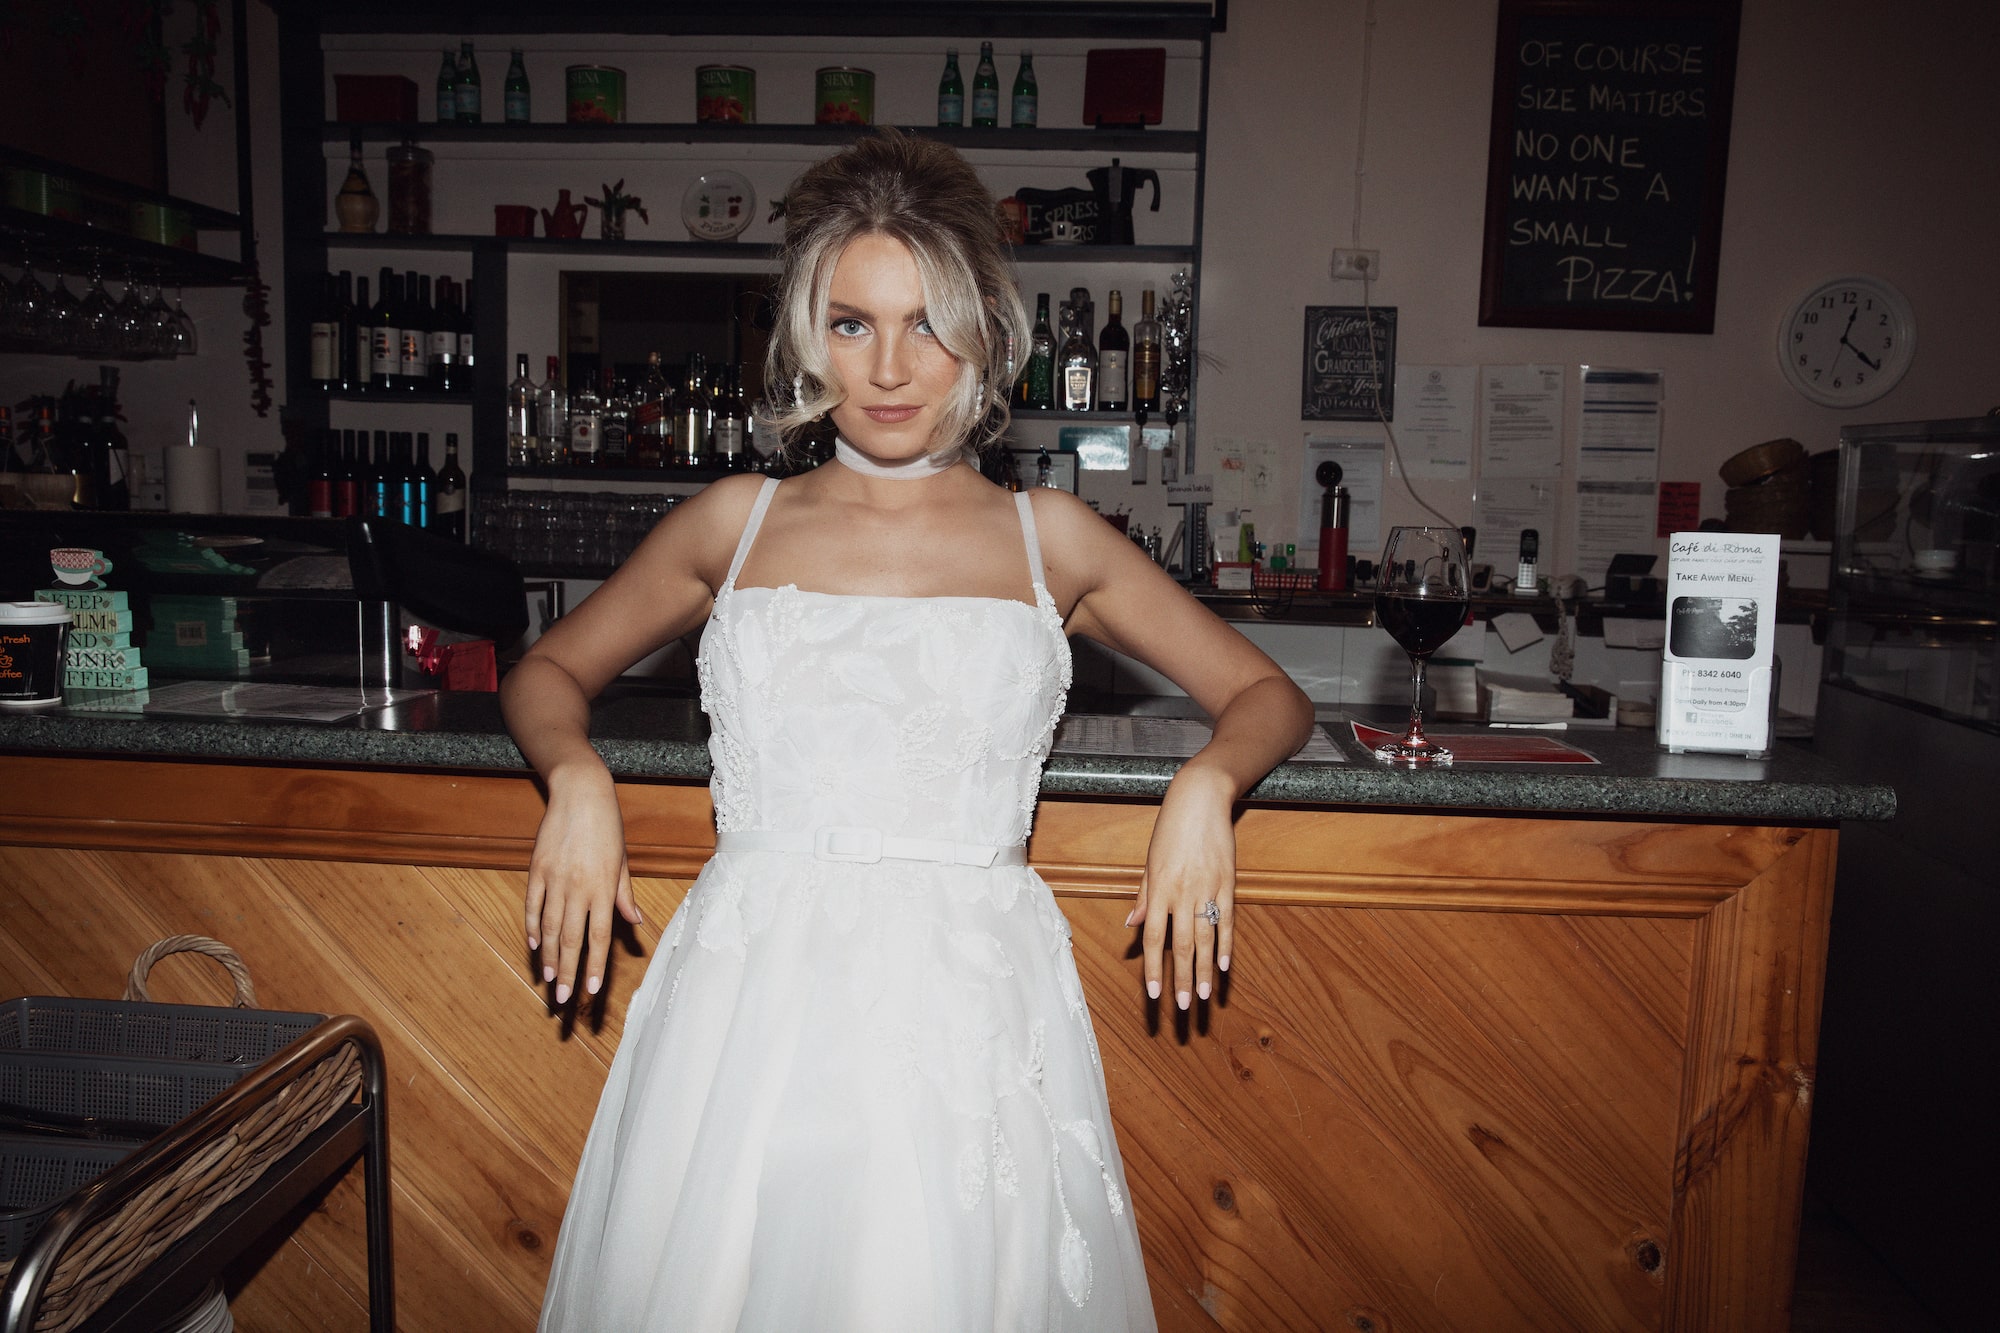 Model leaning against bar counter in Italian cafe wearing the Fiorella gown.